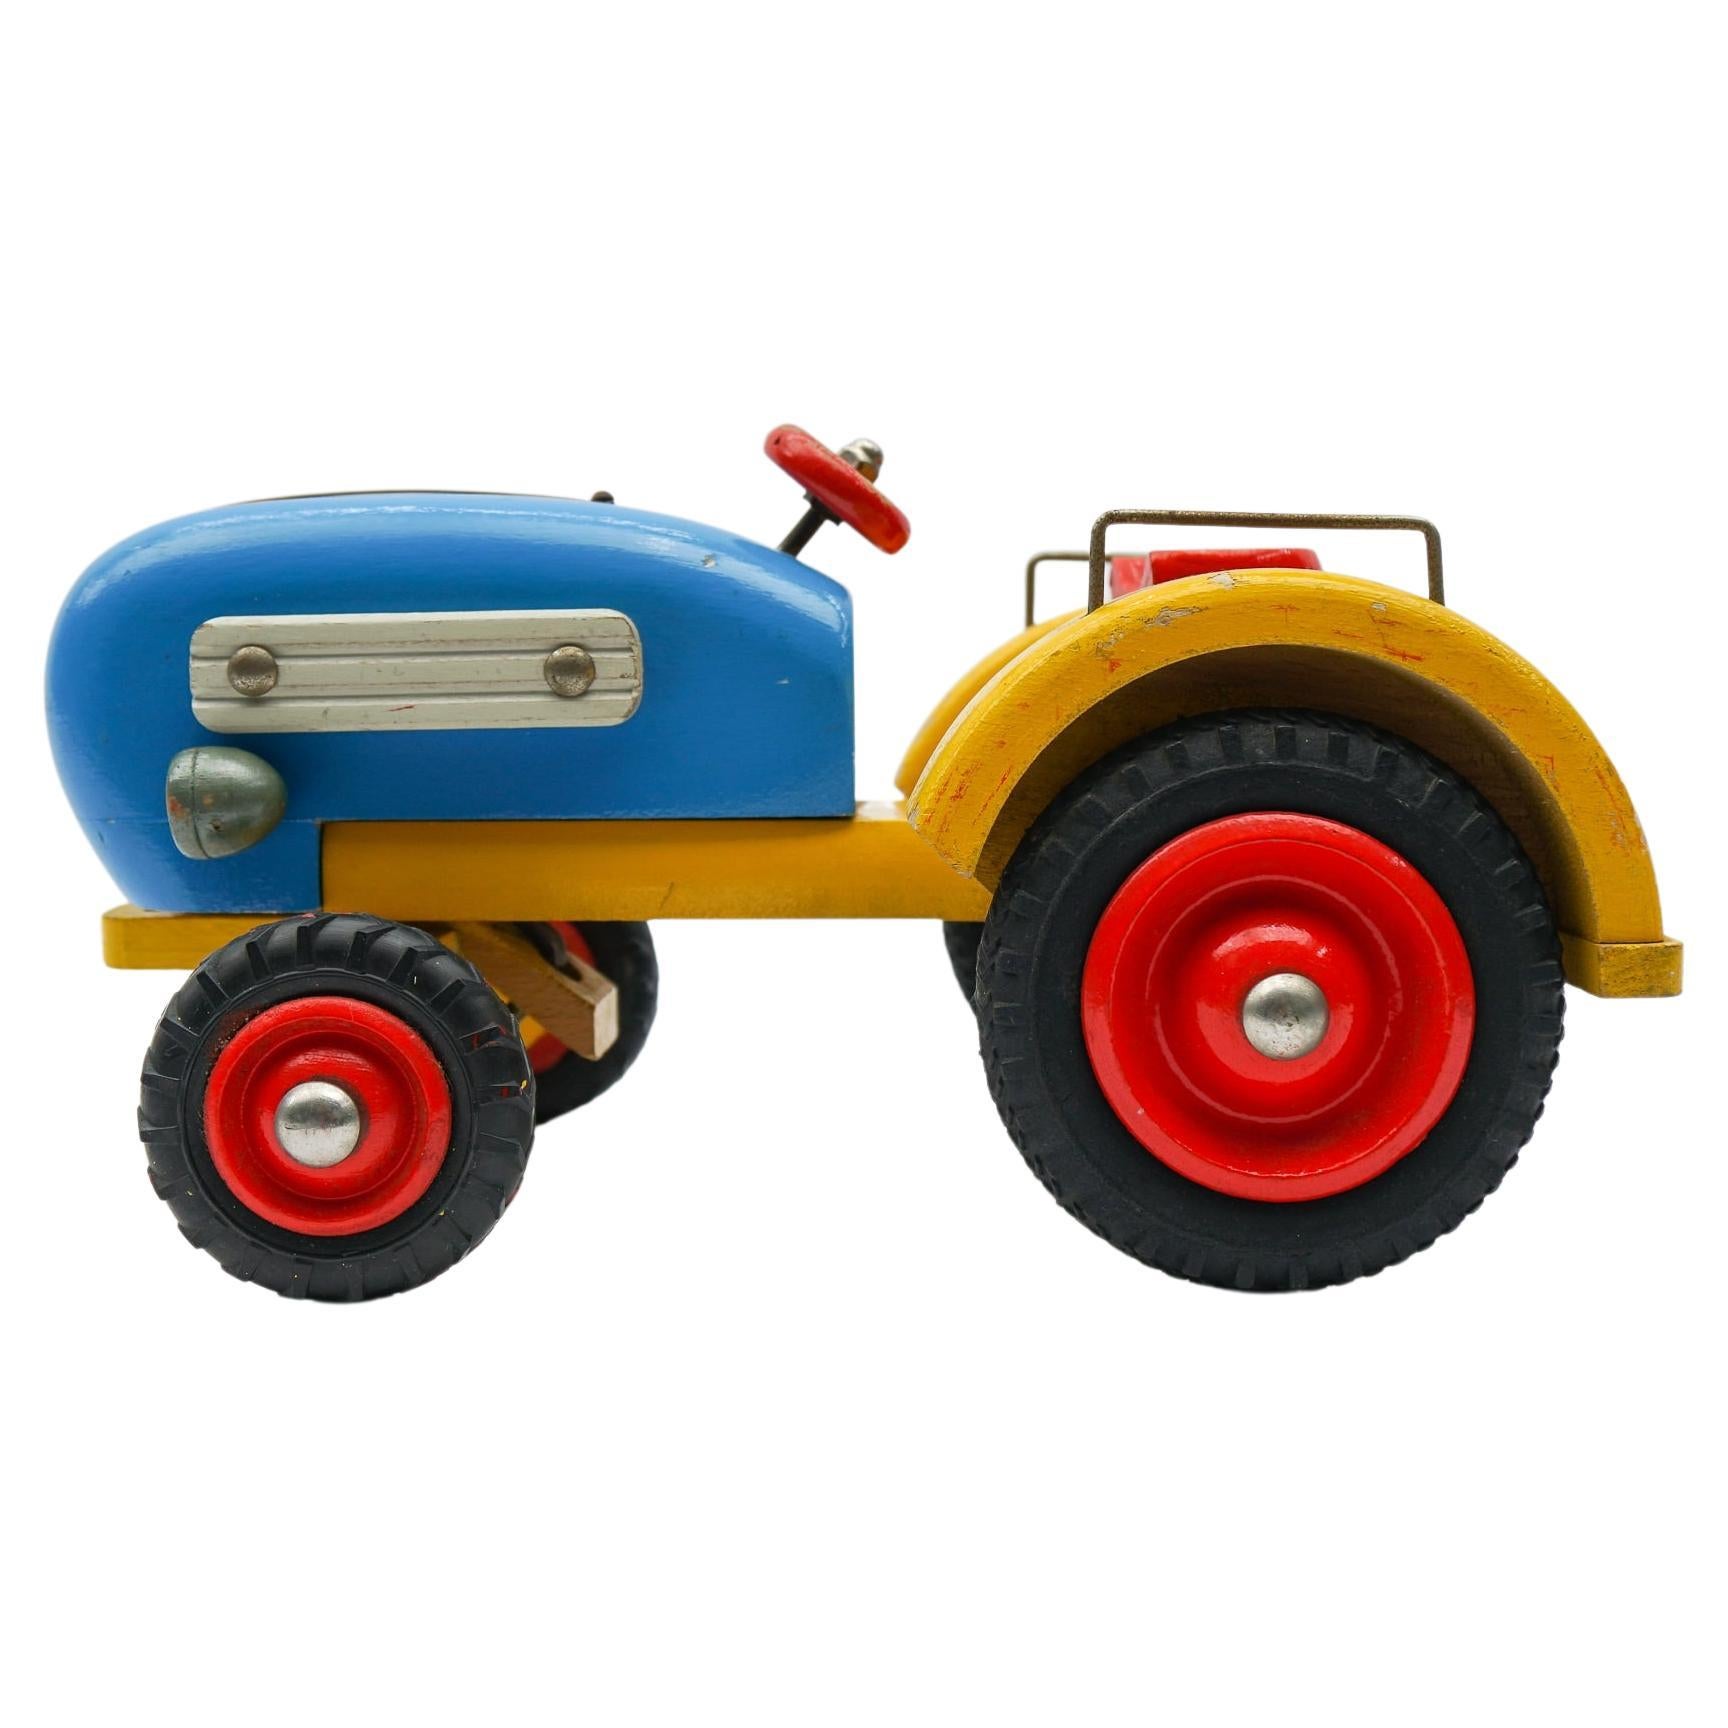 Colorful Waldorf School Tractor with Movable Front Axle, 1950s Germany